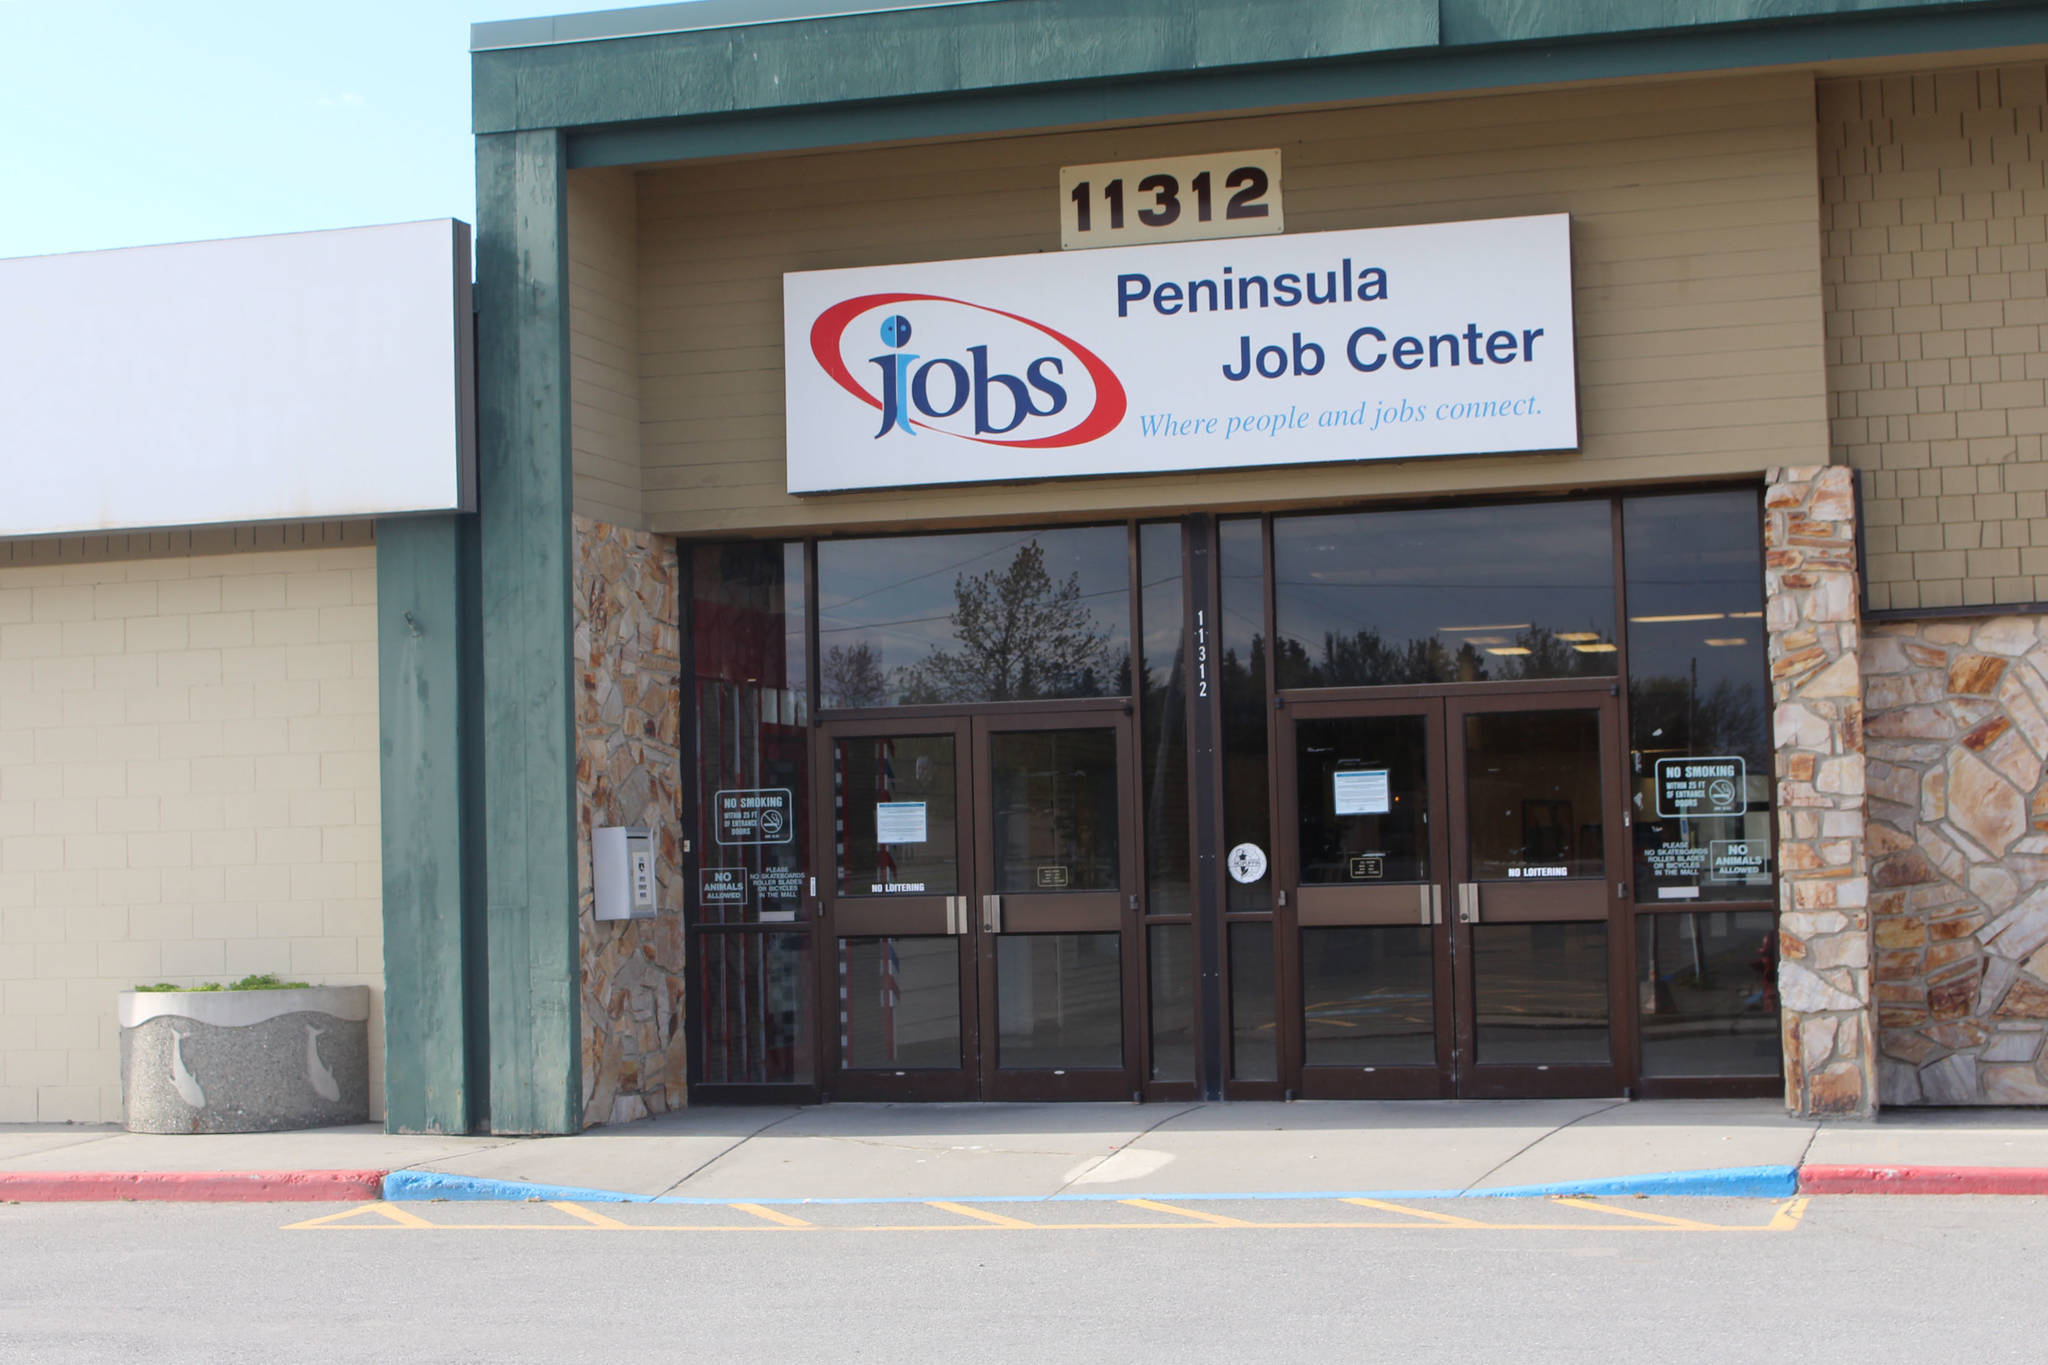 The entrance to the Peninsula Job Center is seen here in Kenai, Alaska on May 28, 2020. (Photo by Brian Mazurek/Peninsula Clarion)